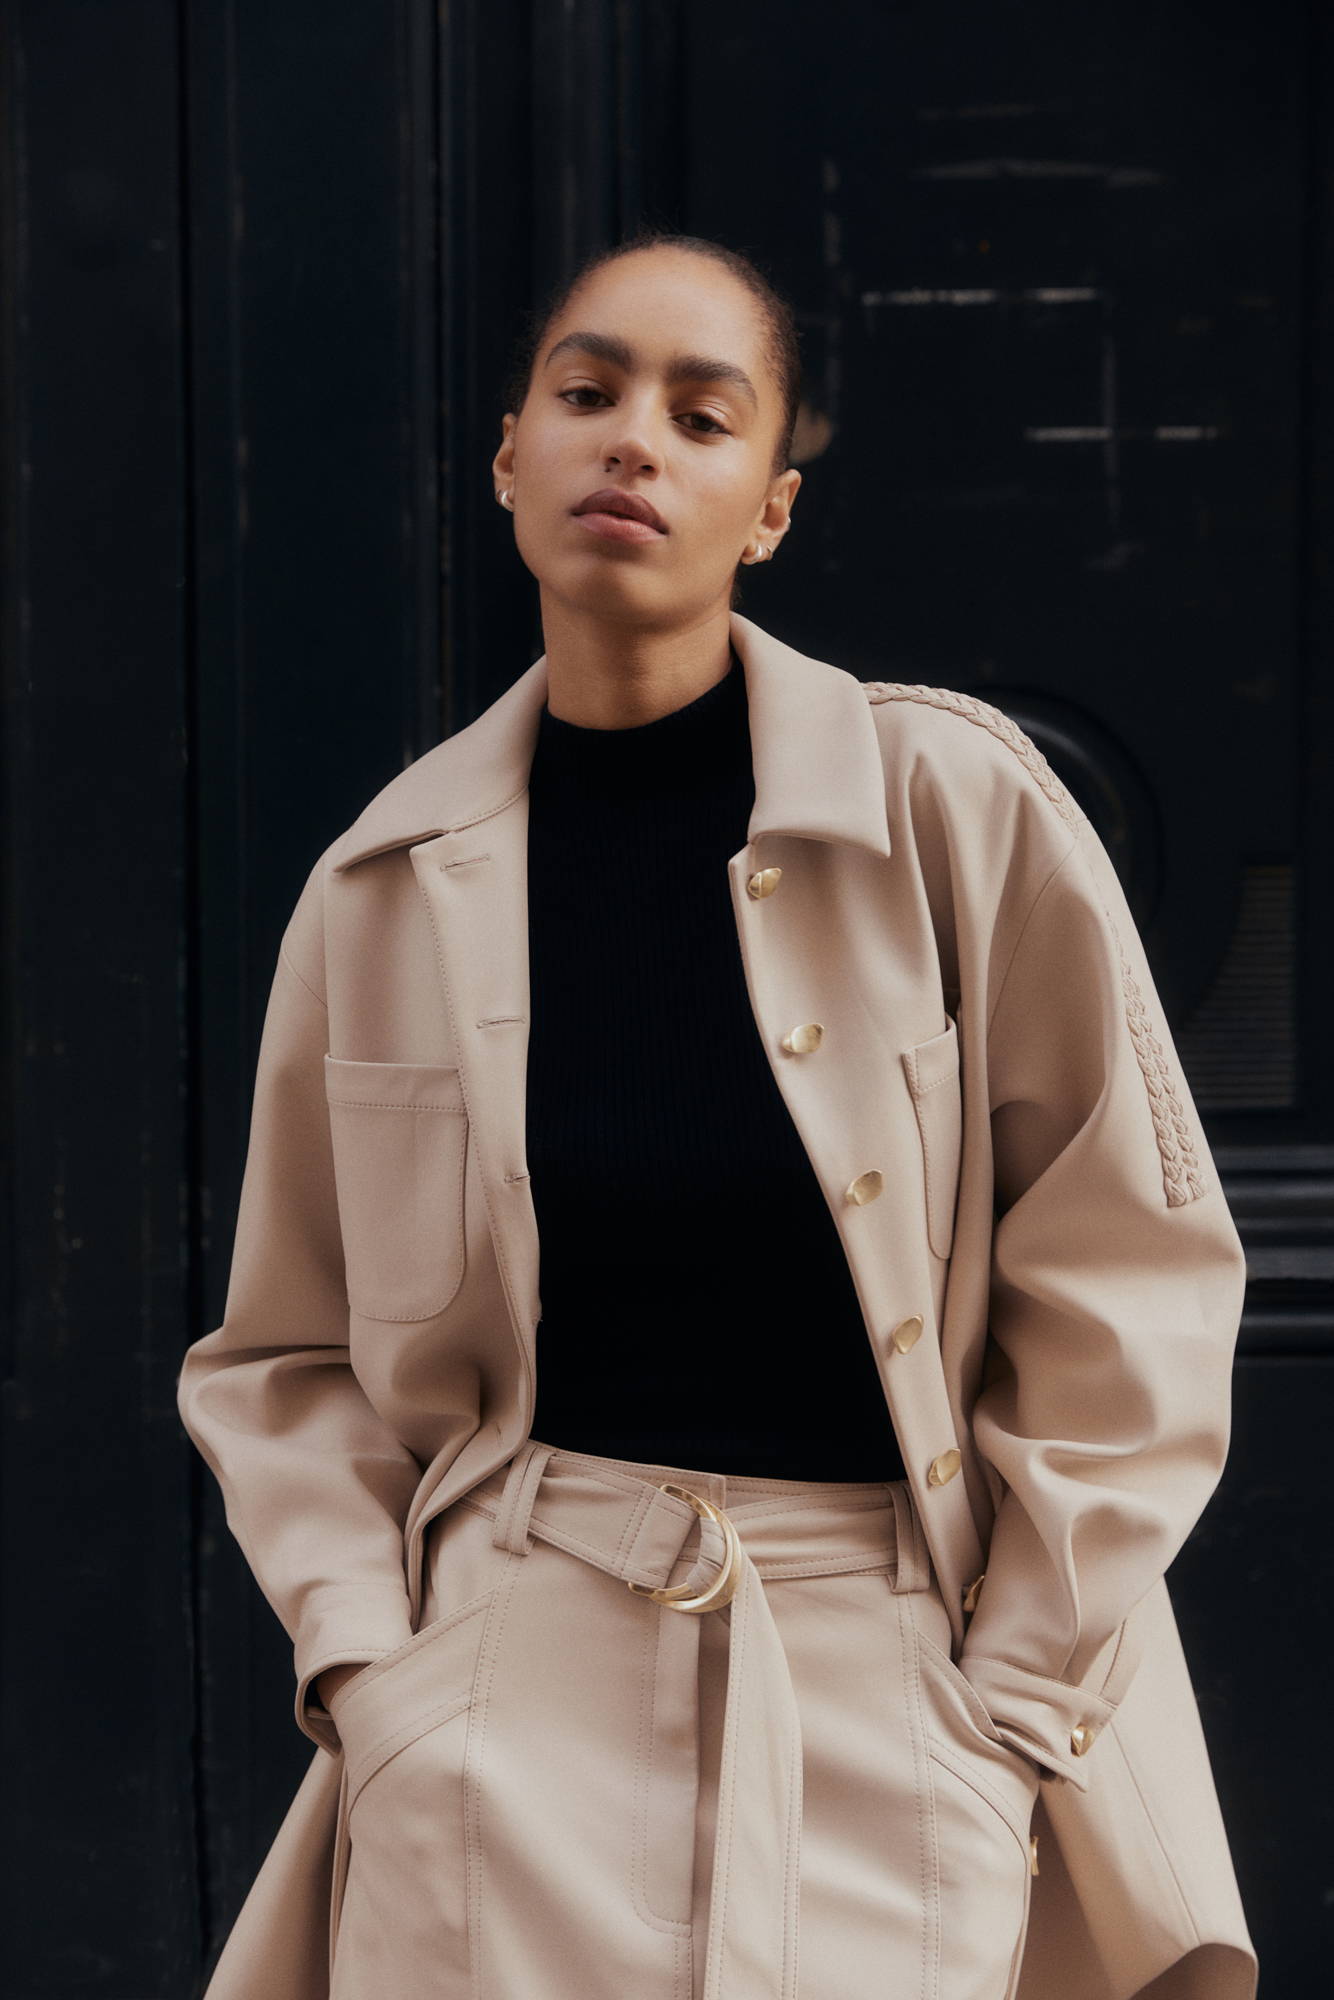 Modest fashion influencer Ana Octarina wears the Altitude Trench Coat from Aje's Eid Edit on the streets of Sydney